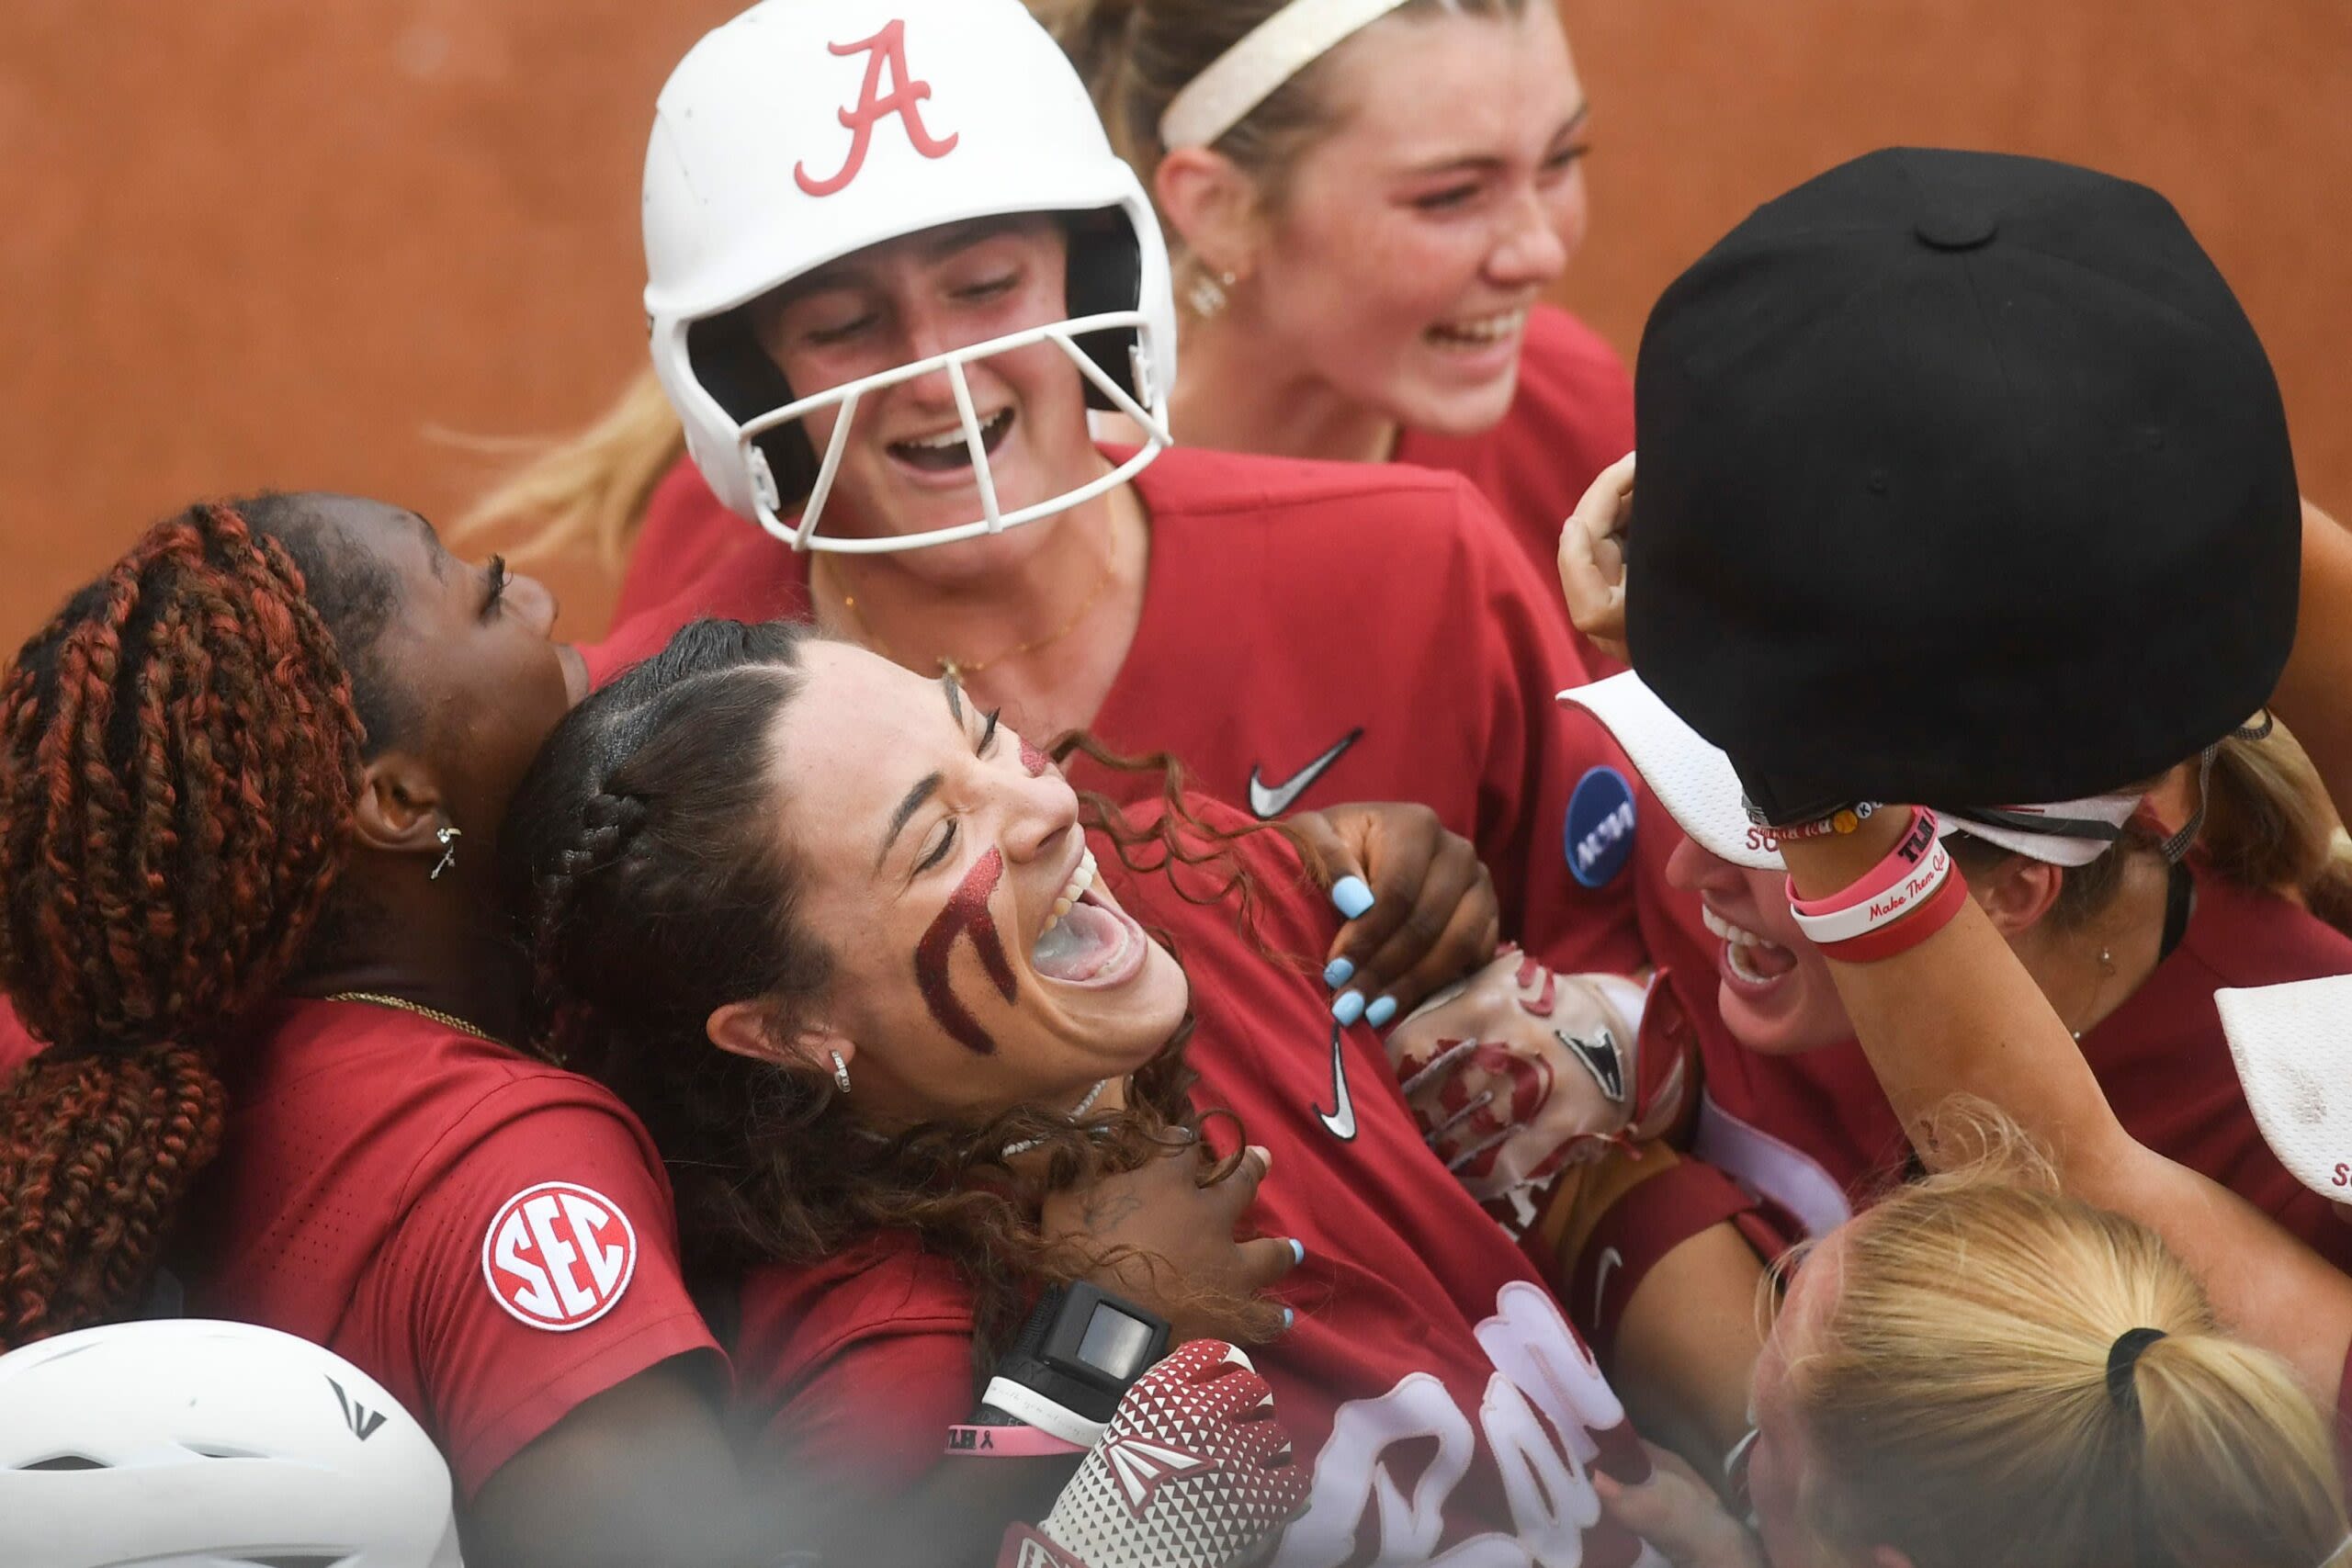 Alabama softball punches ticket to Women’s College World Series with 4-1 win over Lady Vols